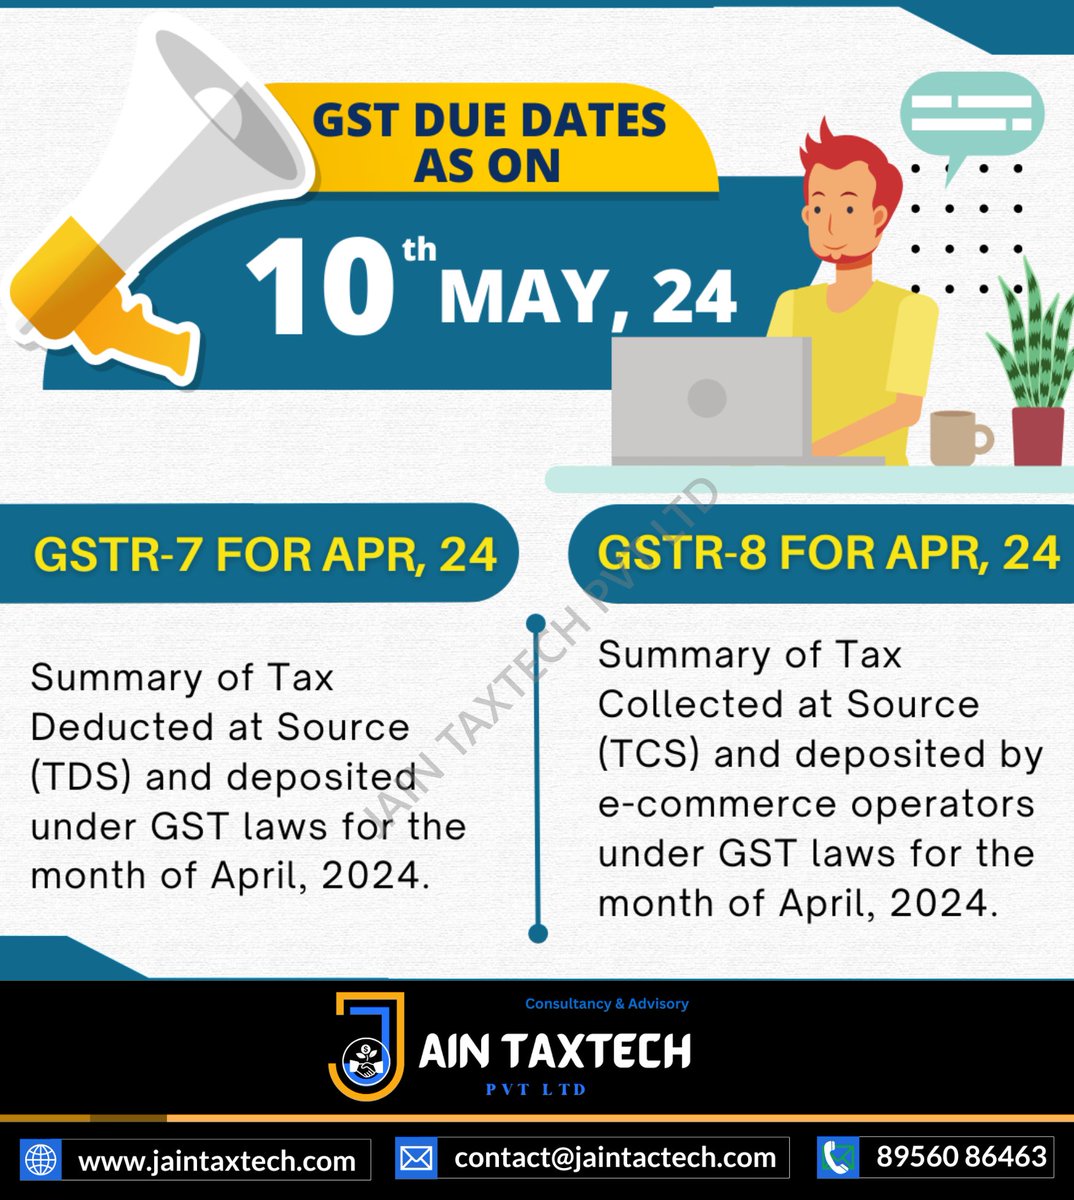 Attention E-commerce Operators! 🛒📊 It's time to file your GSTR-8 for April 2024, summarizing Tax Collected at Source (TCS) under GST laws. Ensure accurate reporting and compliance with Jain TaxTech! 💼💳#GSTIndia #EcommerceTax  #TCS #GSTFiling #TaxCollection #OnlineBusiness